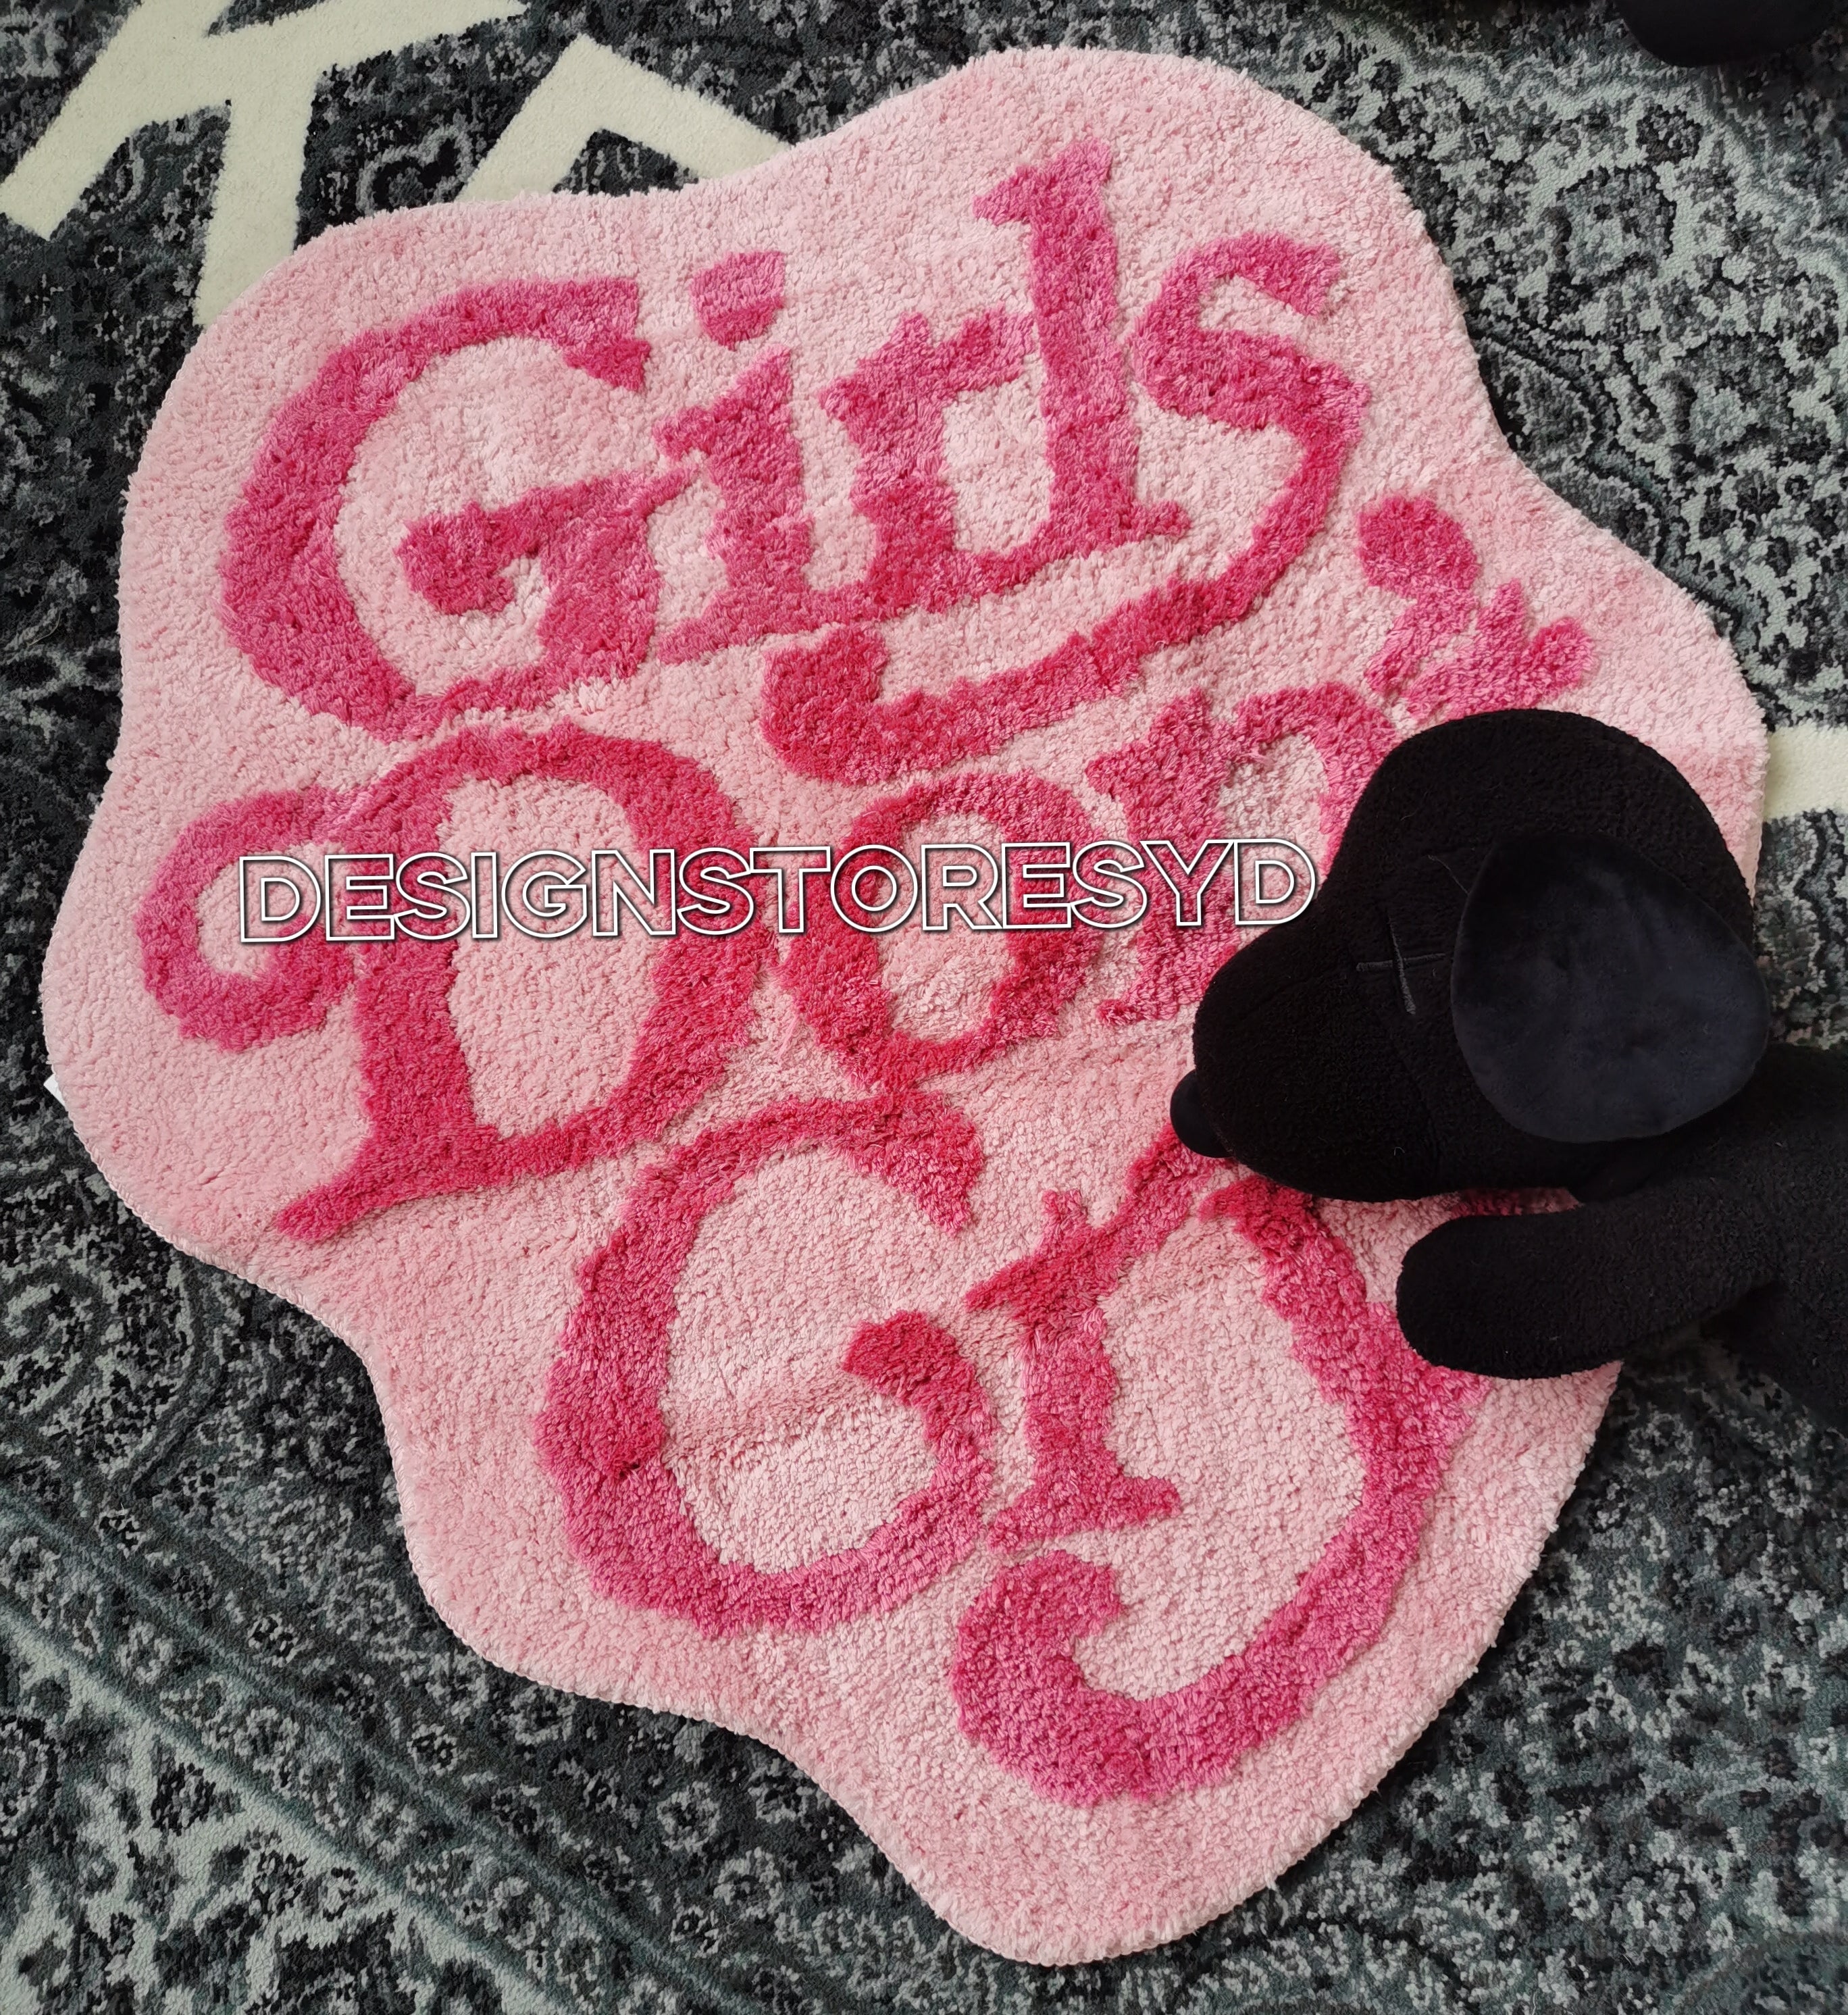 Girls Don’t Cry Rug Pink